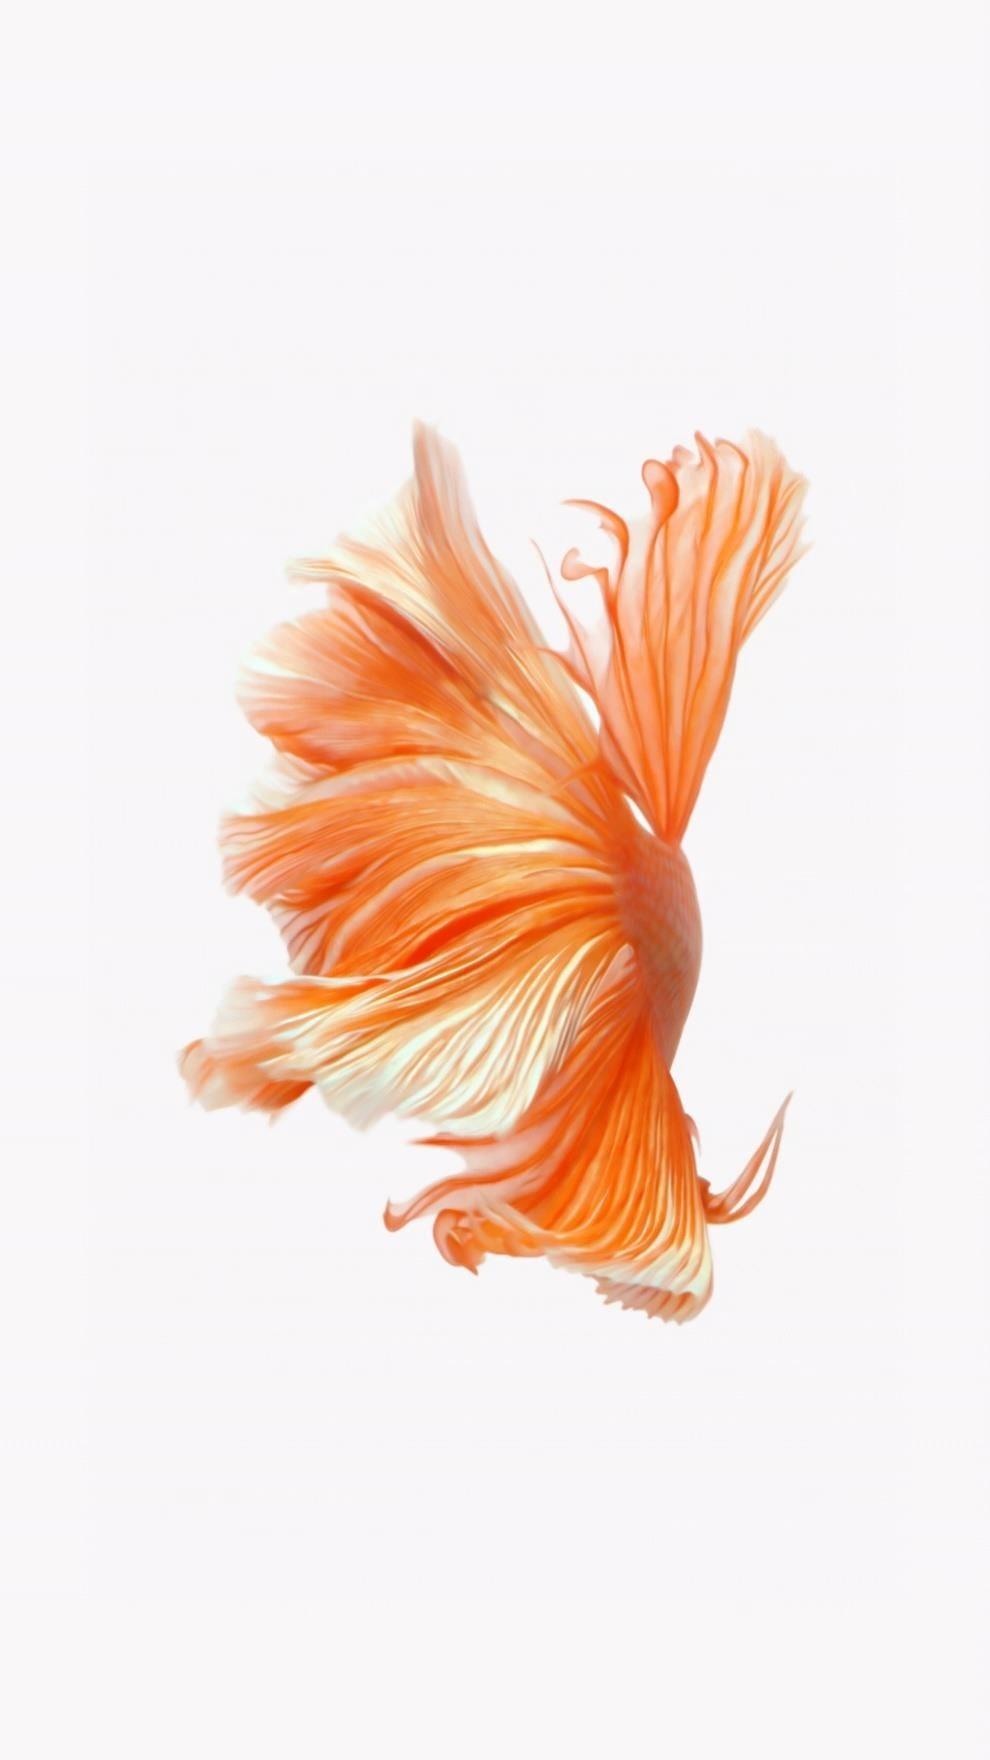 How to Get Apple's Live Fish Wallpapers Back on Your iPhone